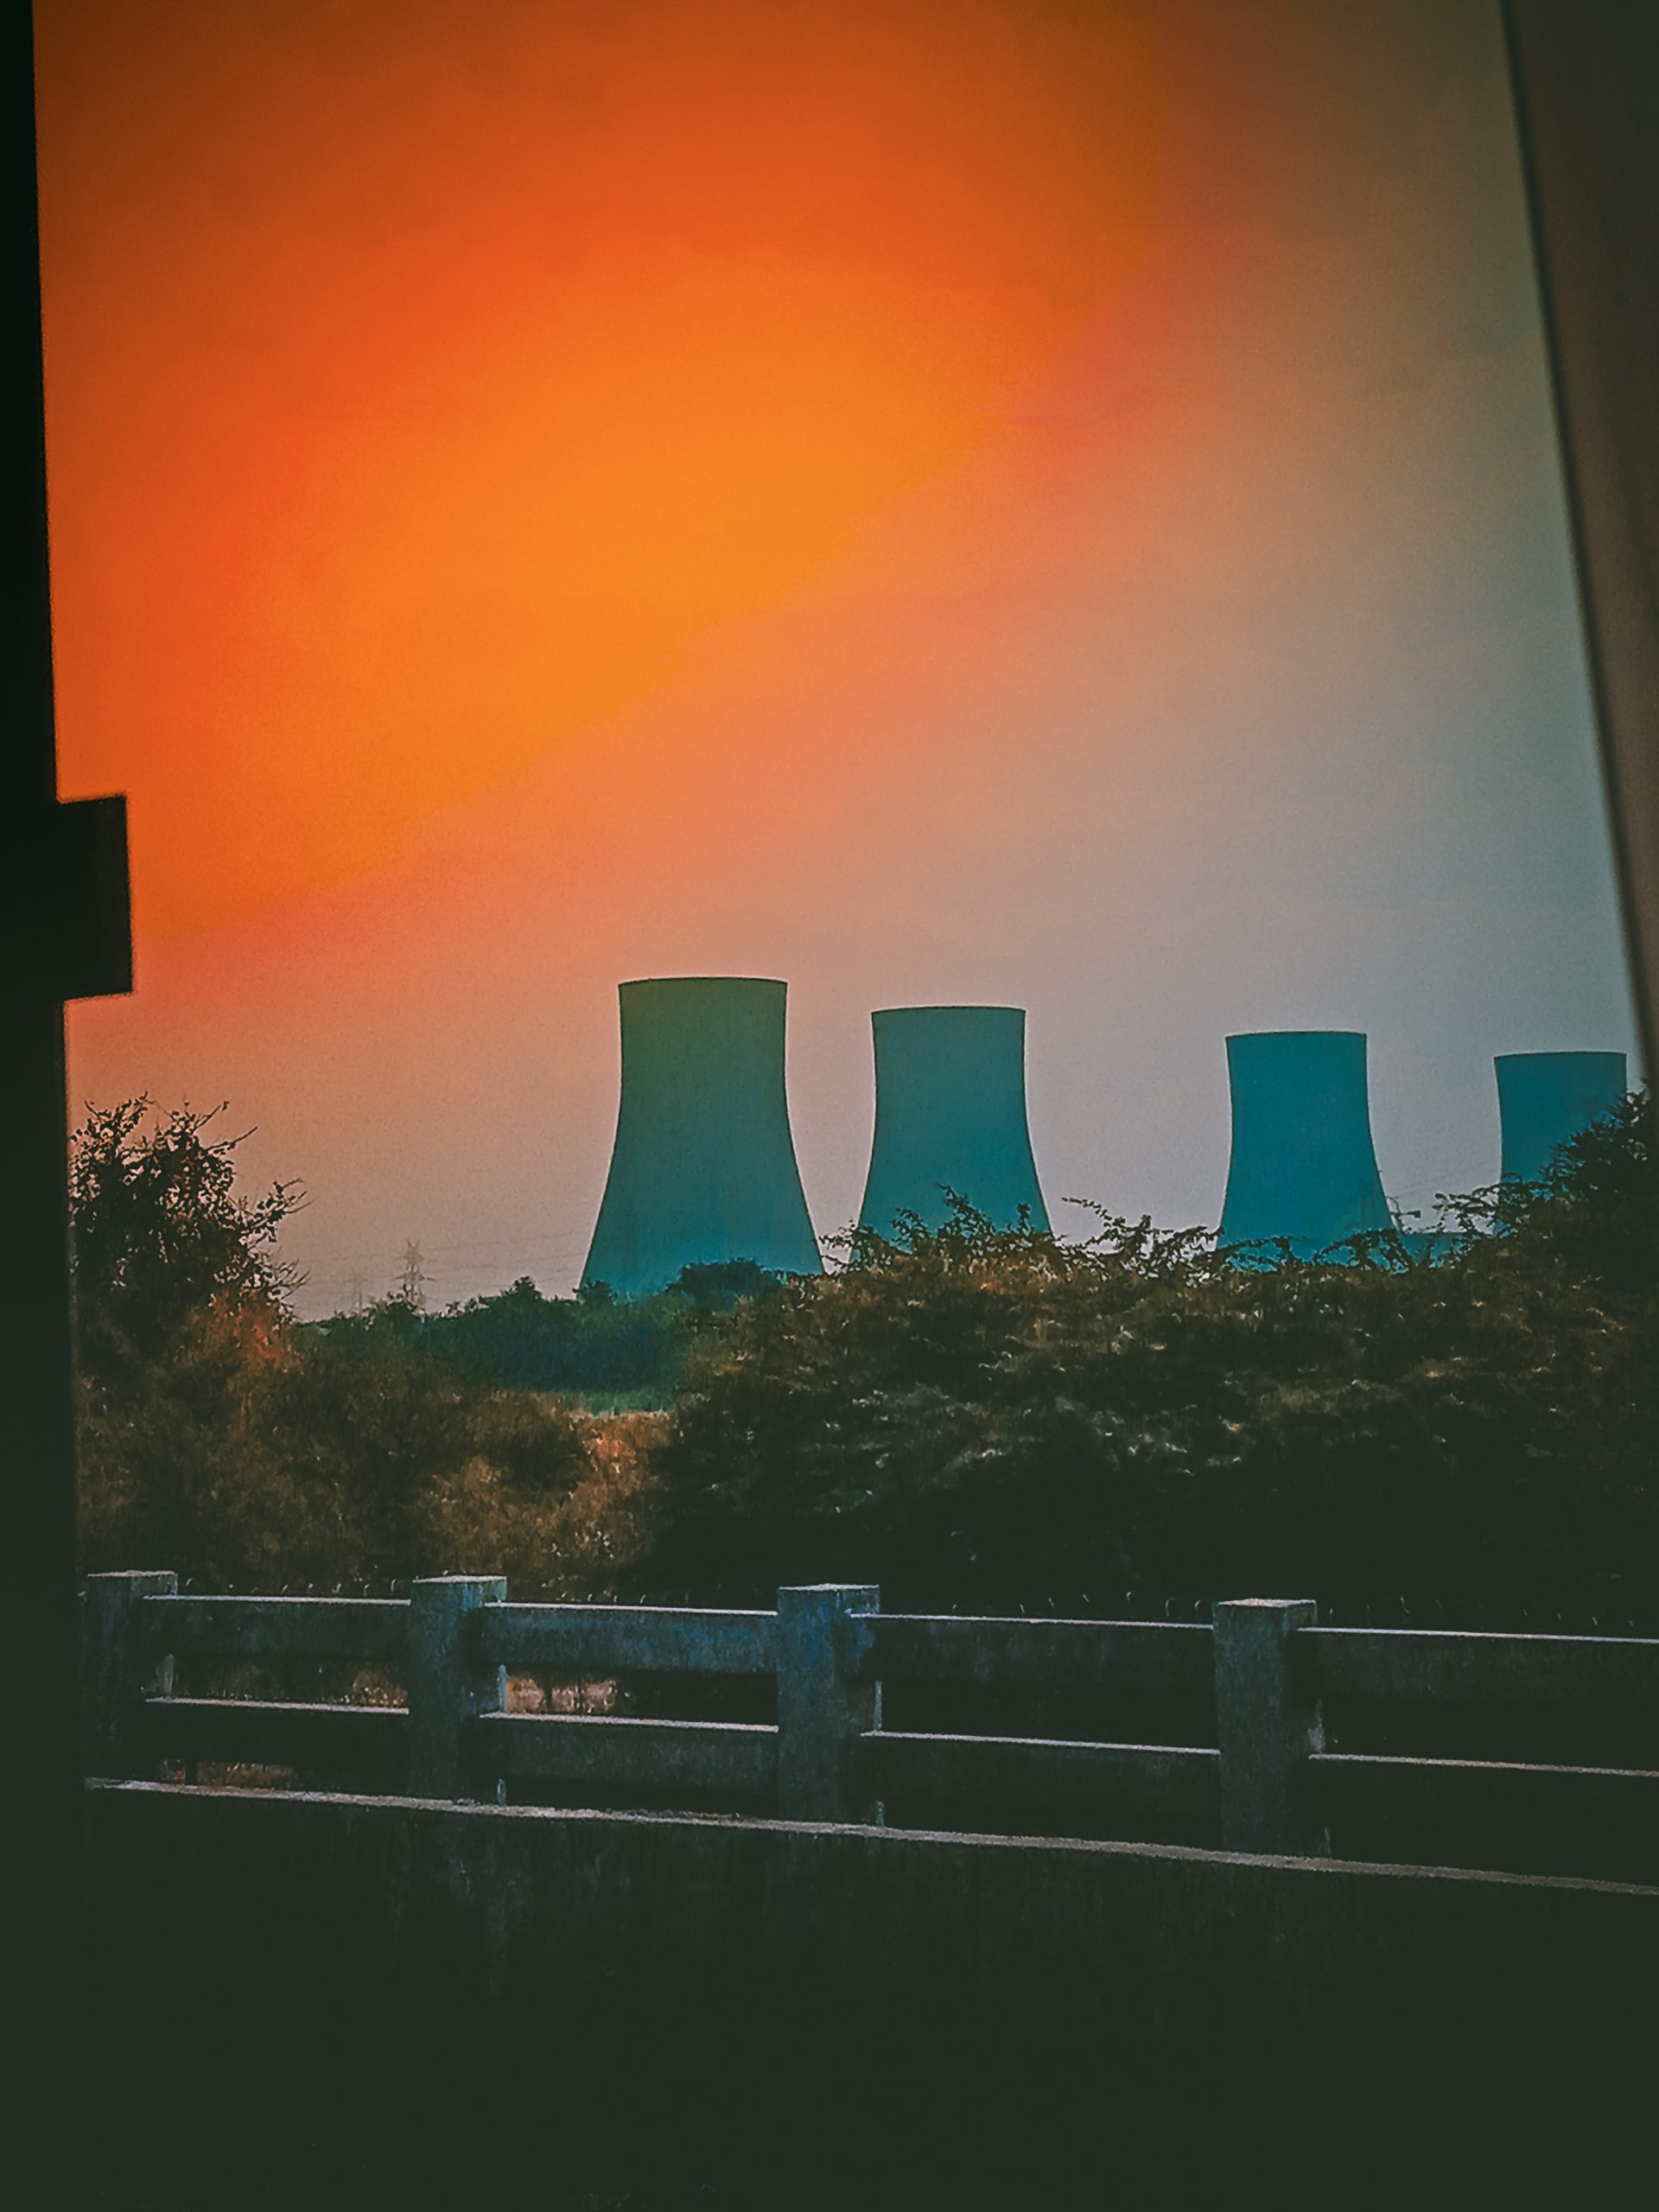 Power station silhouette